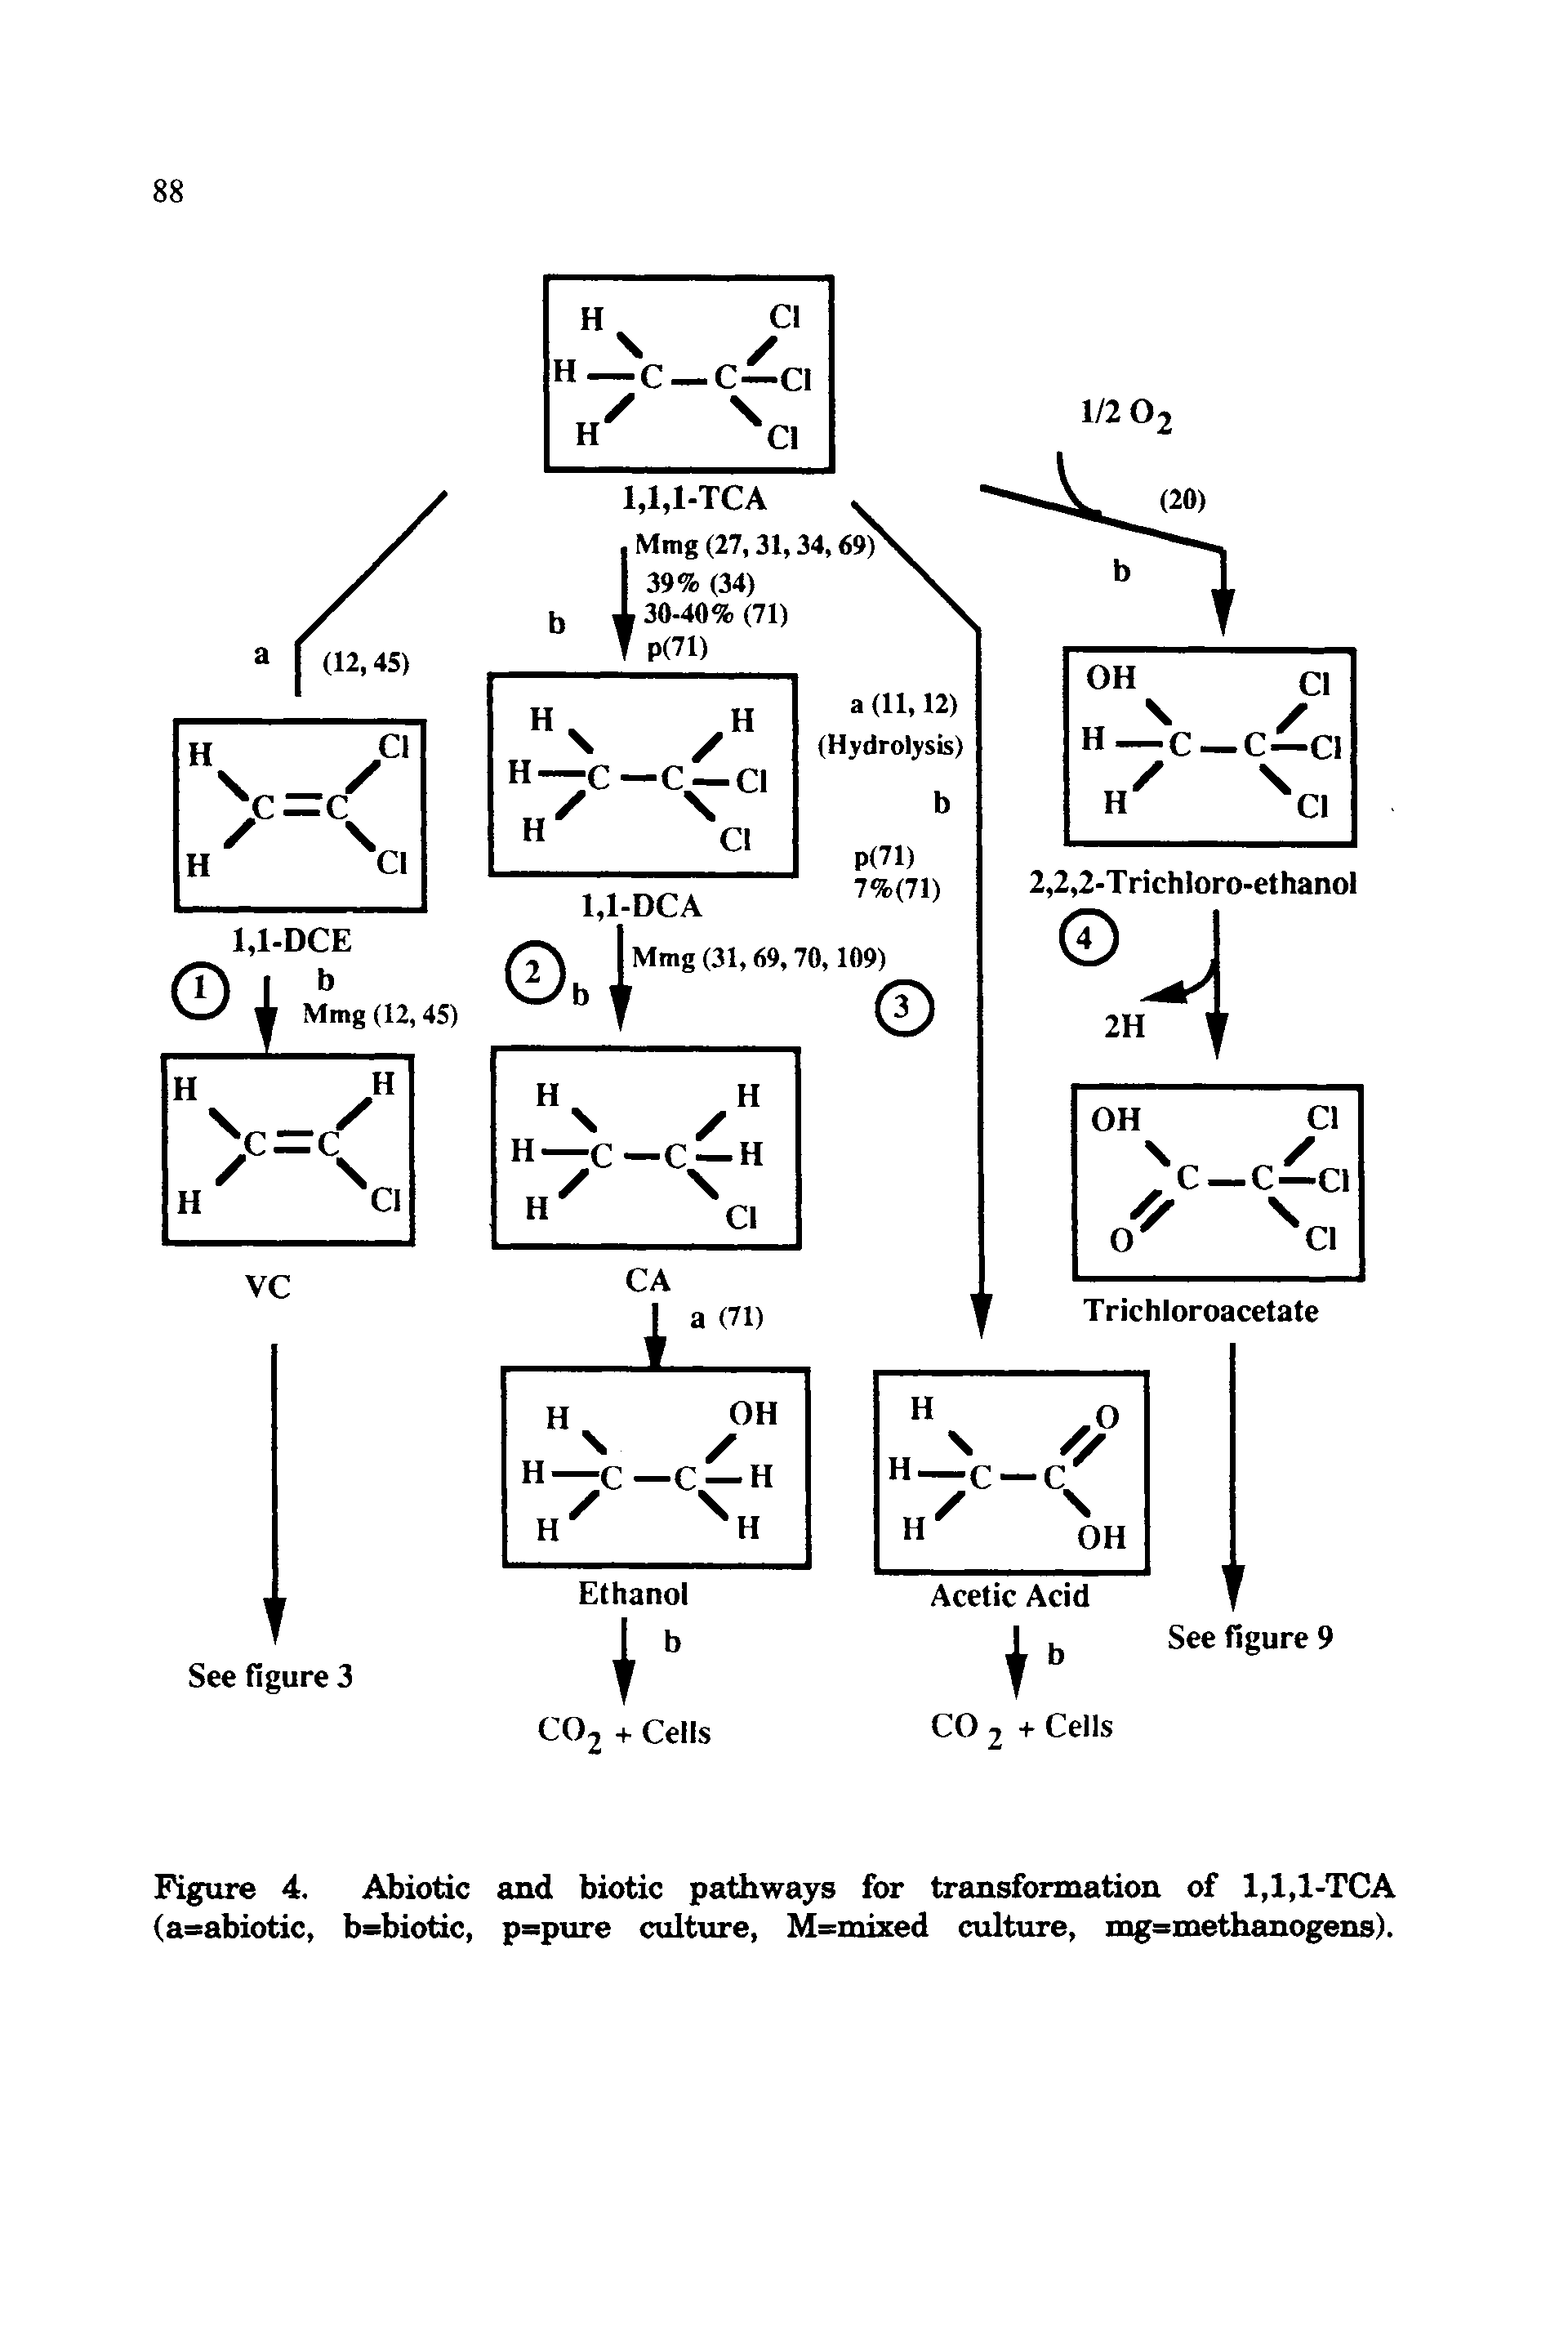 Figure 4. Abiotic and biotic pathways for transformation of 1,1,1-TCA (a=abiotic, b=biotic, p=pure culture, M=mixed culture, mg=methanogens).